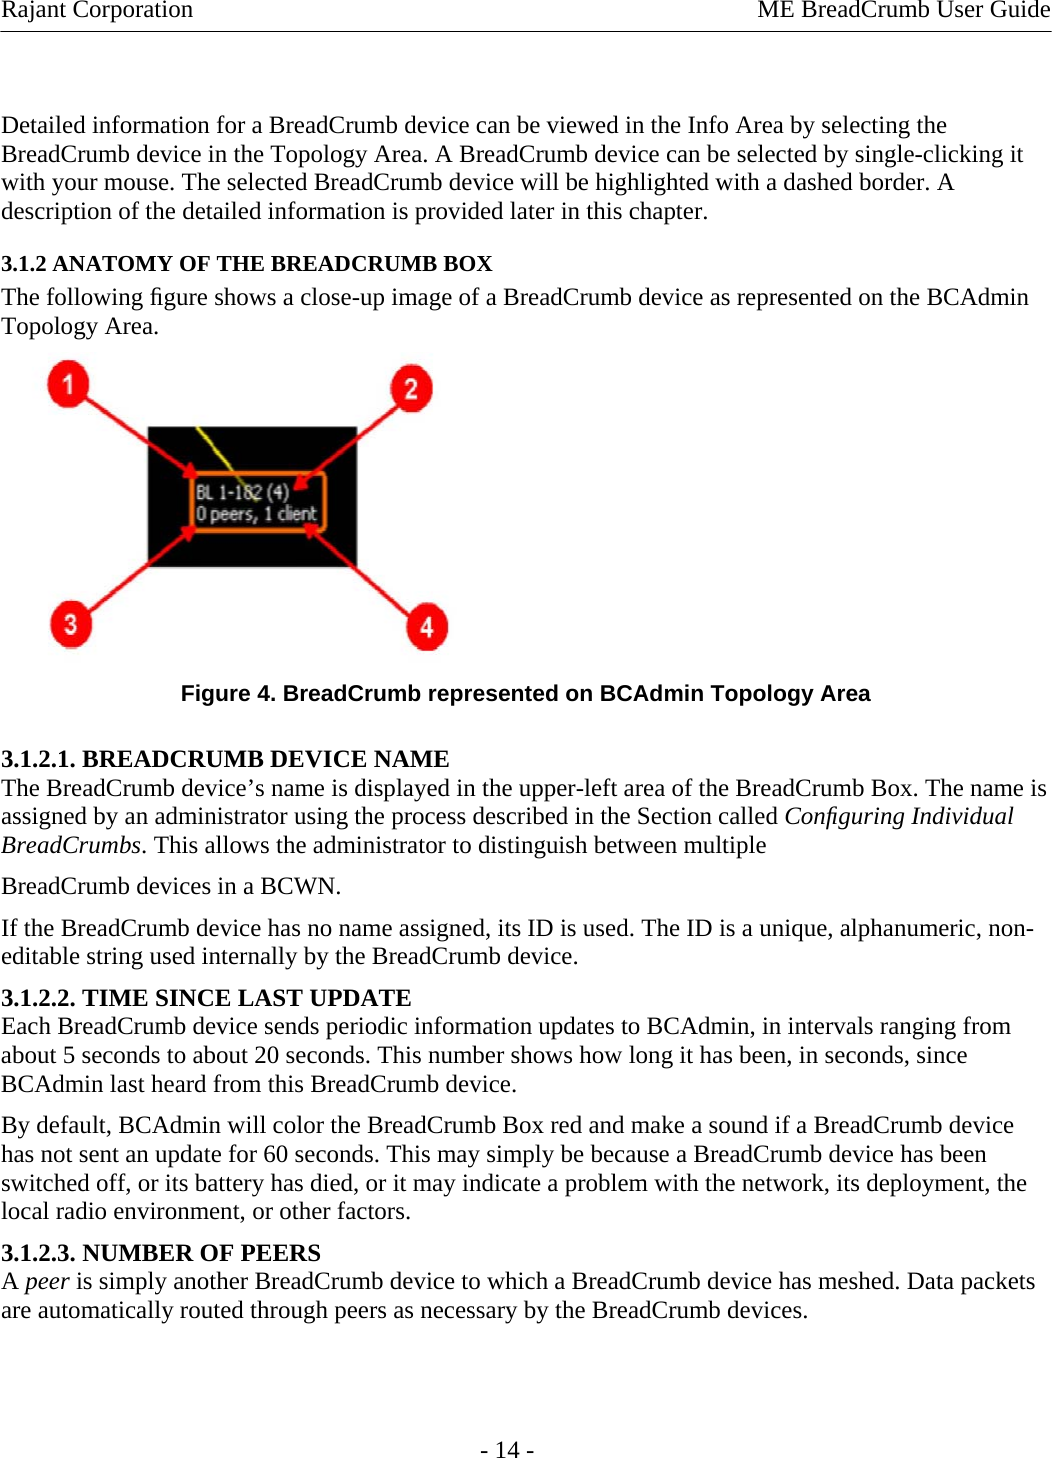 Rajant Corporation    ME BreadCrumb User Guide   Detailed information for a BreadCrumb device can be viewed in the Info Area by selecting the BreadCrumb device in the Topology Area. A BreadCrumb device can be selected by single-clicking it with your mouse. The selected BreadCrumb device will be highlighted with a dashed border. A description of the detailed information is provided later in this chapter. 3.1.2 ANATOMY OF THE BREADCRUMB BOX  The following ﬁgure shows a close-up image of a BreadCrumb device as represented on the BCAdmin Topology Area.  Figure 4. BreadCrumb represented on BCAdmin Topology Area 3.1.2.1. BREADCRUMB DEVICE NAME The BreadCrumb device’s name is displayed in the upper-left area of the BreadCrumb Box. The name is assigned by an administrator using the process described in the Section called Conﬁguring Individual BreadCrumbs. This allows the administrator to distinguish between multiple  BreadCrumb devices in a BCWN.  If the BreadCrumb device has no name assigned, its ID is used. The ID is a unique, alphanumeric, non-editable string used internally by the BreadCrumb device.  3.1.2.2. TIME SINCE LAST UPDATE  Each BreadCrumb device sends periodic information updates to BCAdmin, in intervals ranging from about 5 seconds to about 20 seconds. This number shows how long it has been, in seconds, since BCAdmin last heard from this BreadCrumb device.  By default, BCAdmin will color the BreadCrumb Box red and make a sound if a BreadCrumb device has not sent an update for 60 seconds. This may simply be because a BreadCrumb device has been switched off, or its battery has died, or it may indicate a problem with the network, its deployment, the local radio environment, or other factors.  3.1.2.3. NUMBER OF PEERS  A peer is simply another BreadCrumb device to which a BreadCrumb device has meshed. Data packets are automatically routed through peers as necessary by the BreadCrumb devices.    - 14 - 